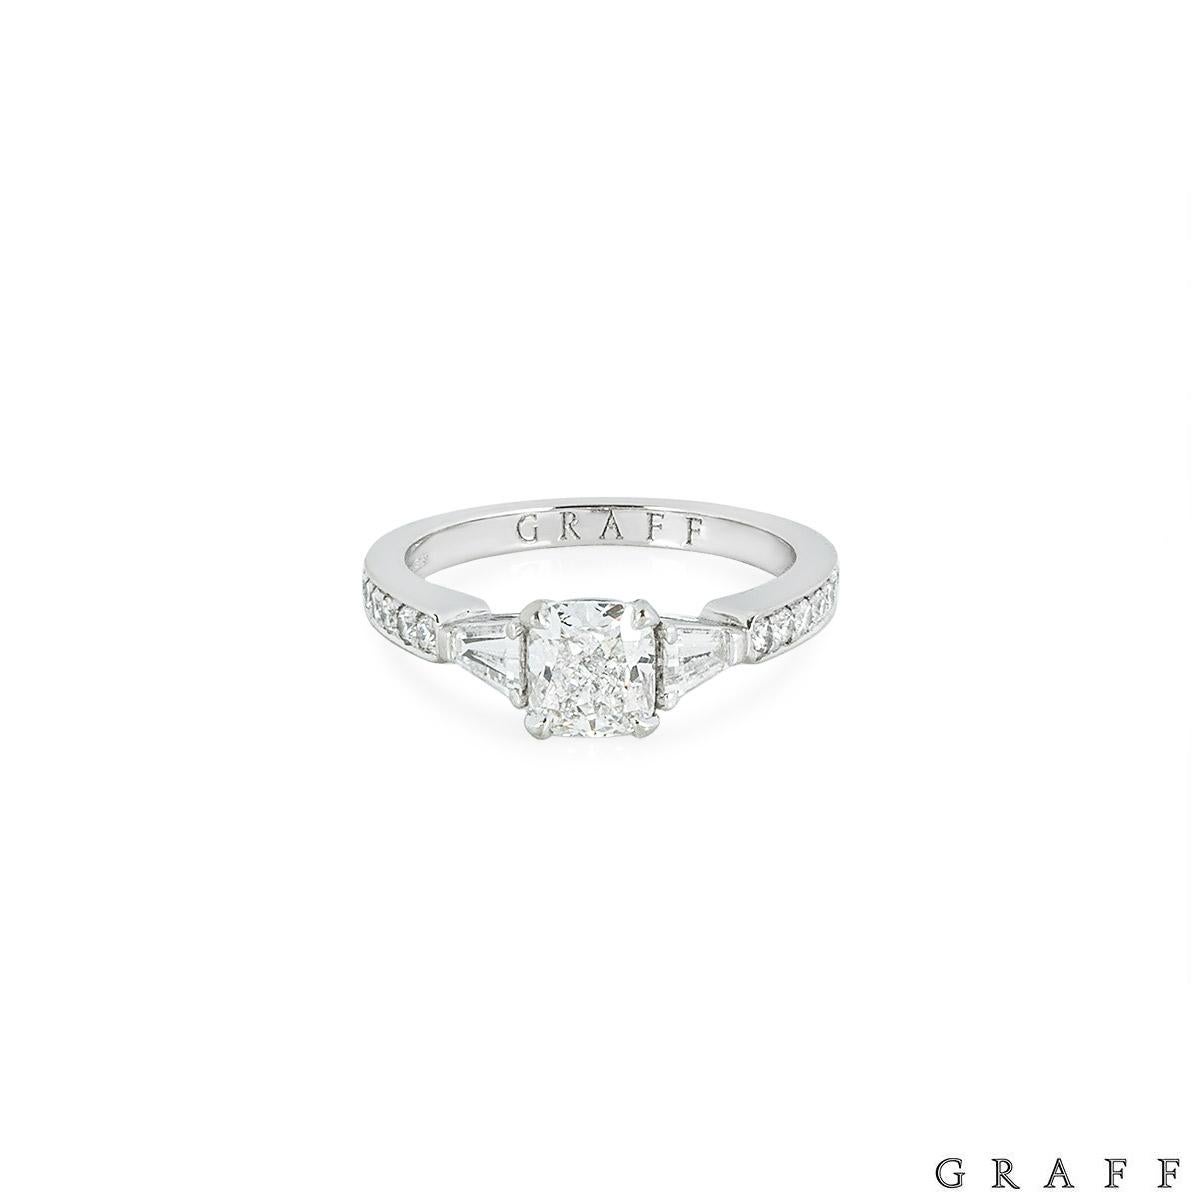 Graff Platinum Cushion Cut Diamond Promise Ring 0.90ct G/VS1 In Excellent Condition For Sale In London, GB